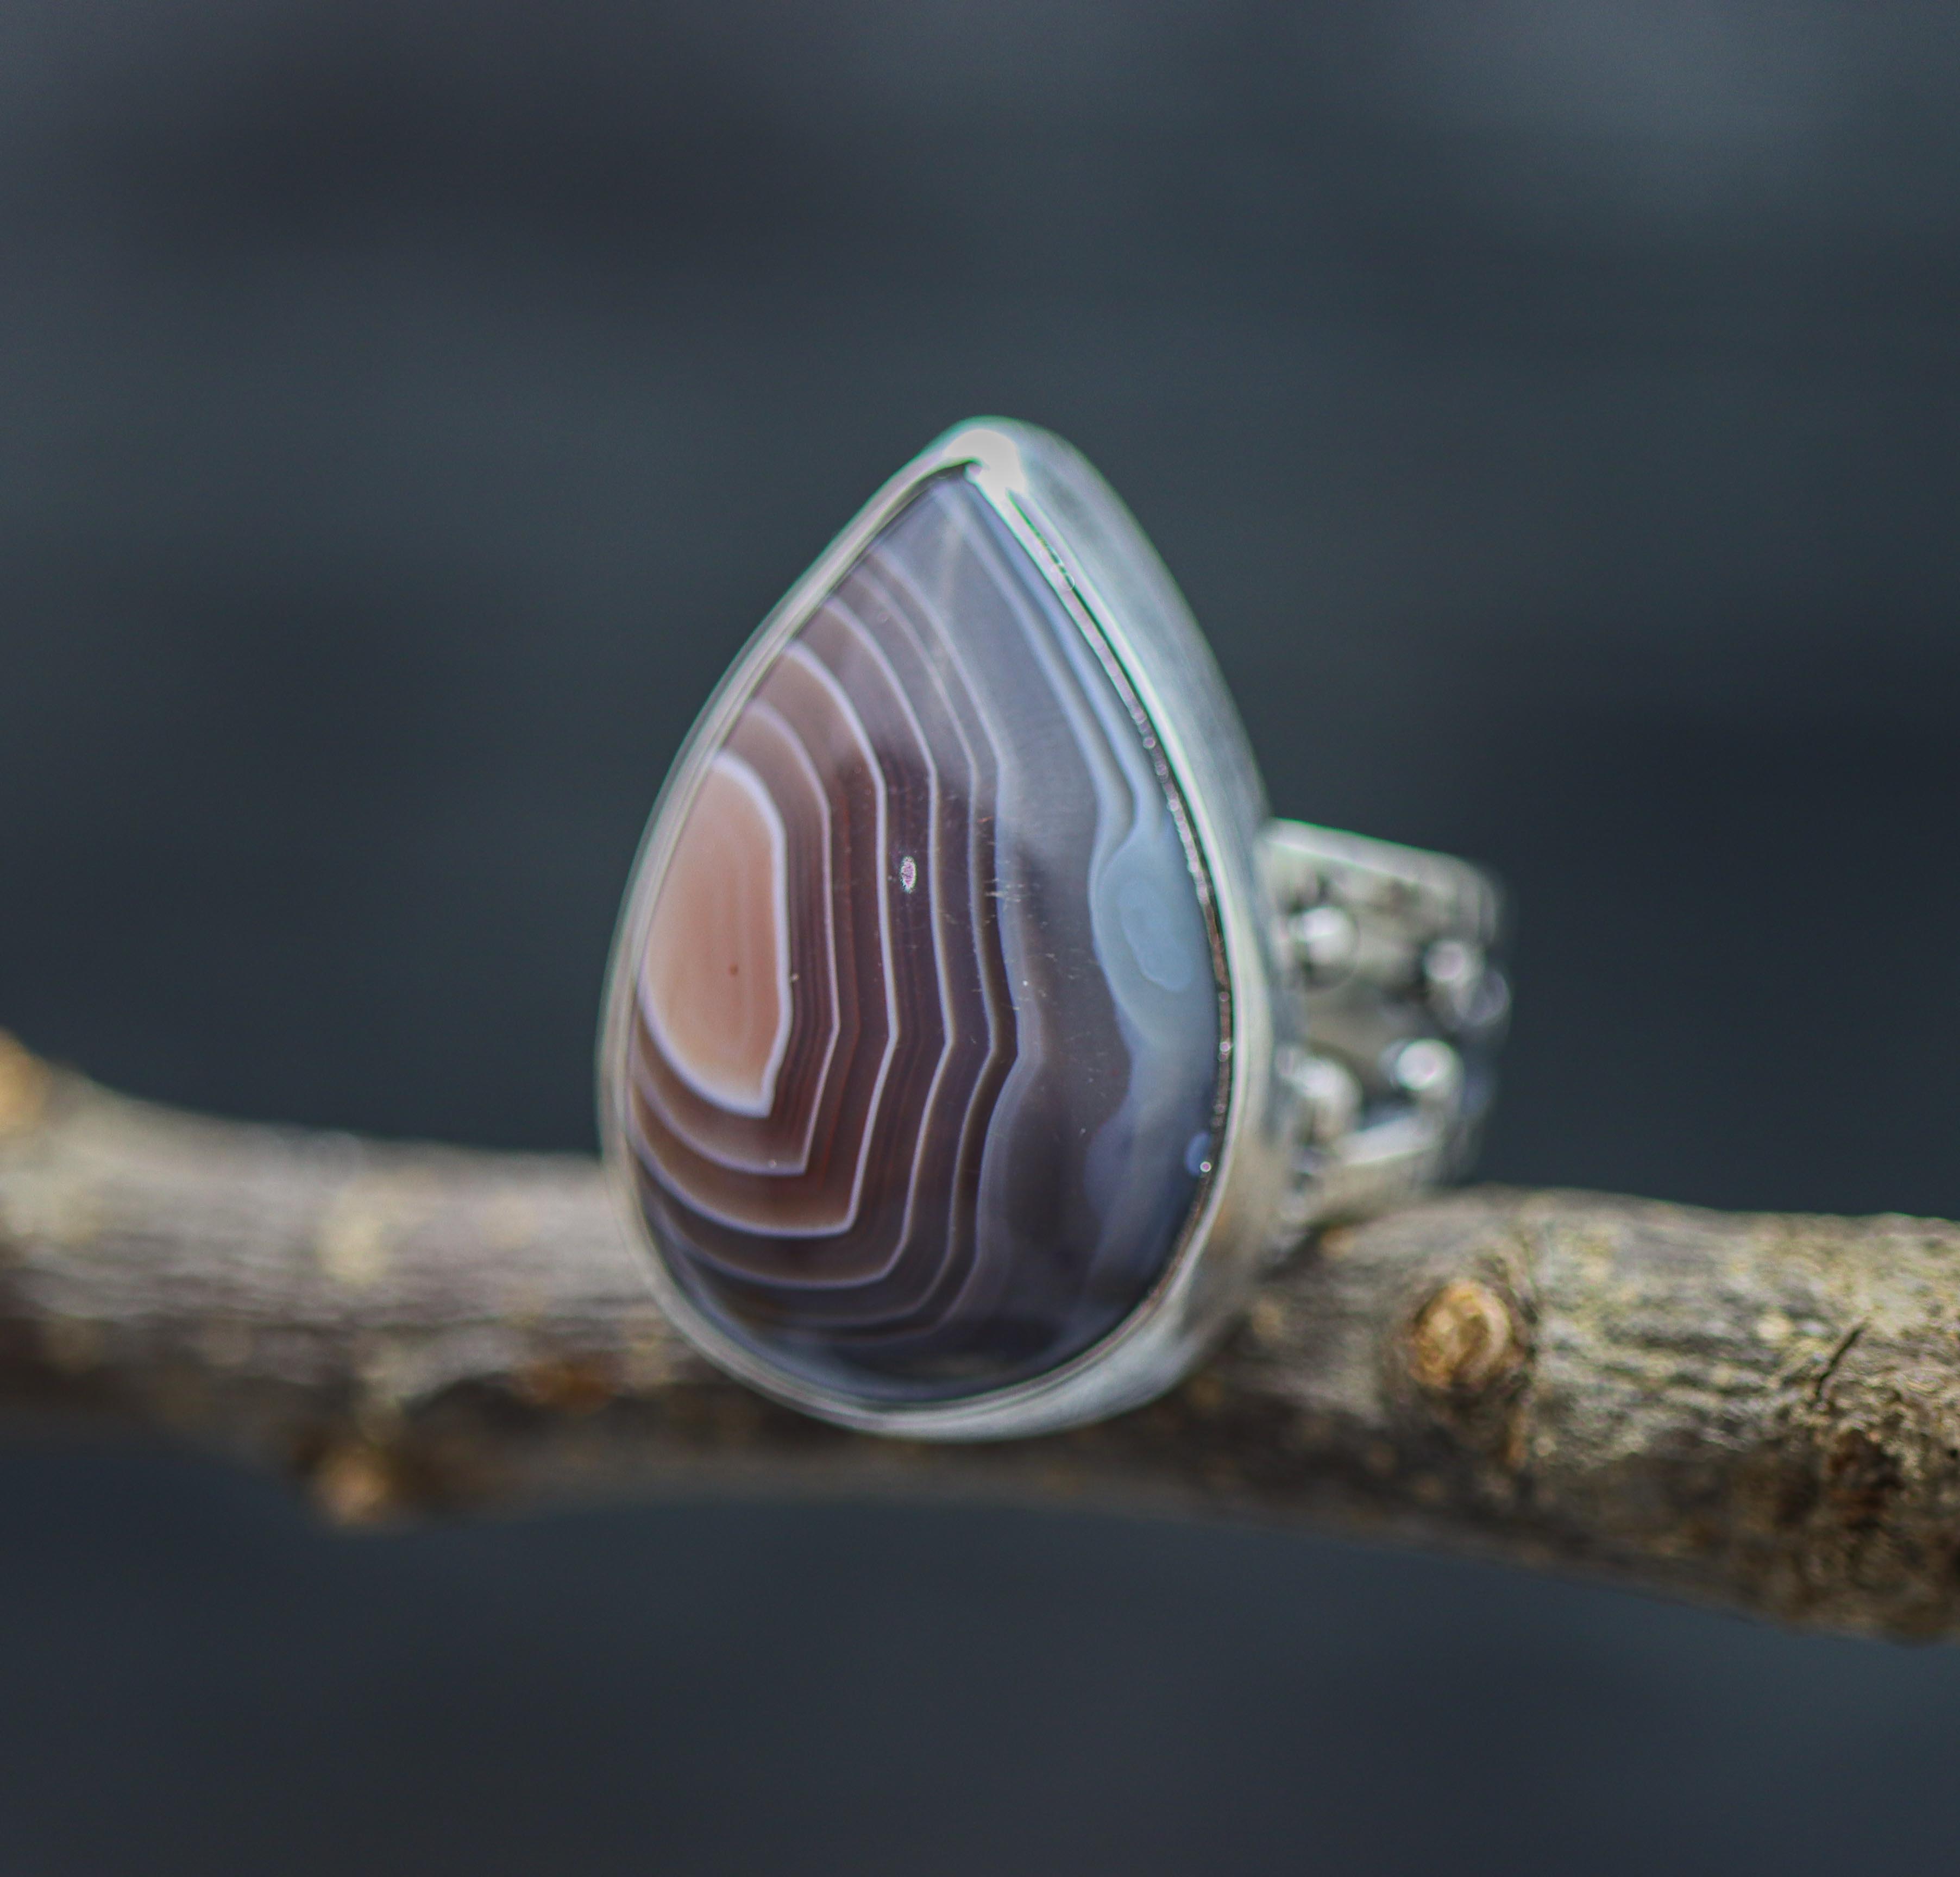 *ON SALE* Botswana Agate Sterling Silver Bubble Band Ring Size 7